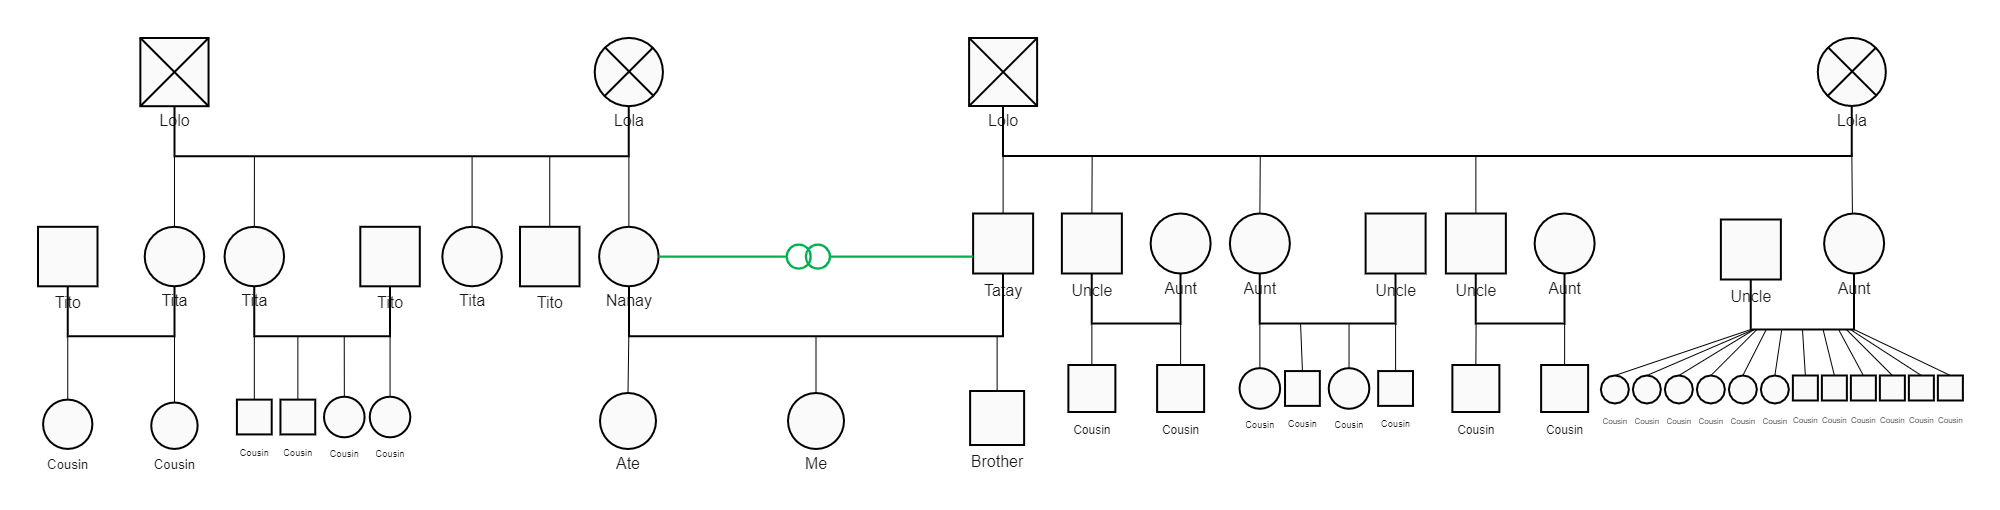 Entire Genogram Structure About Both Sides